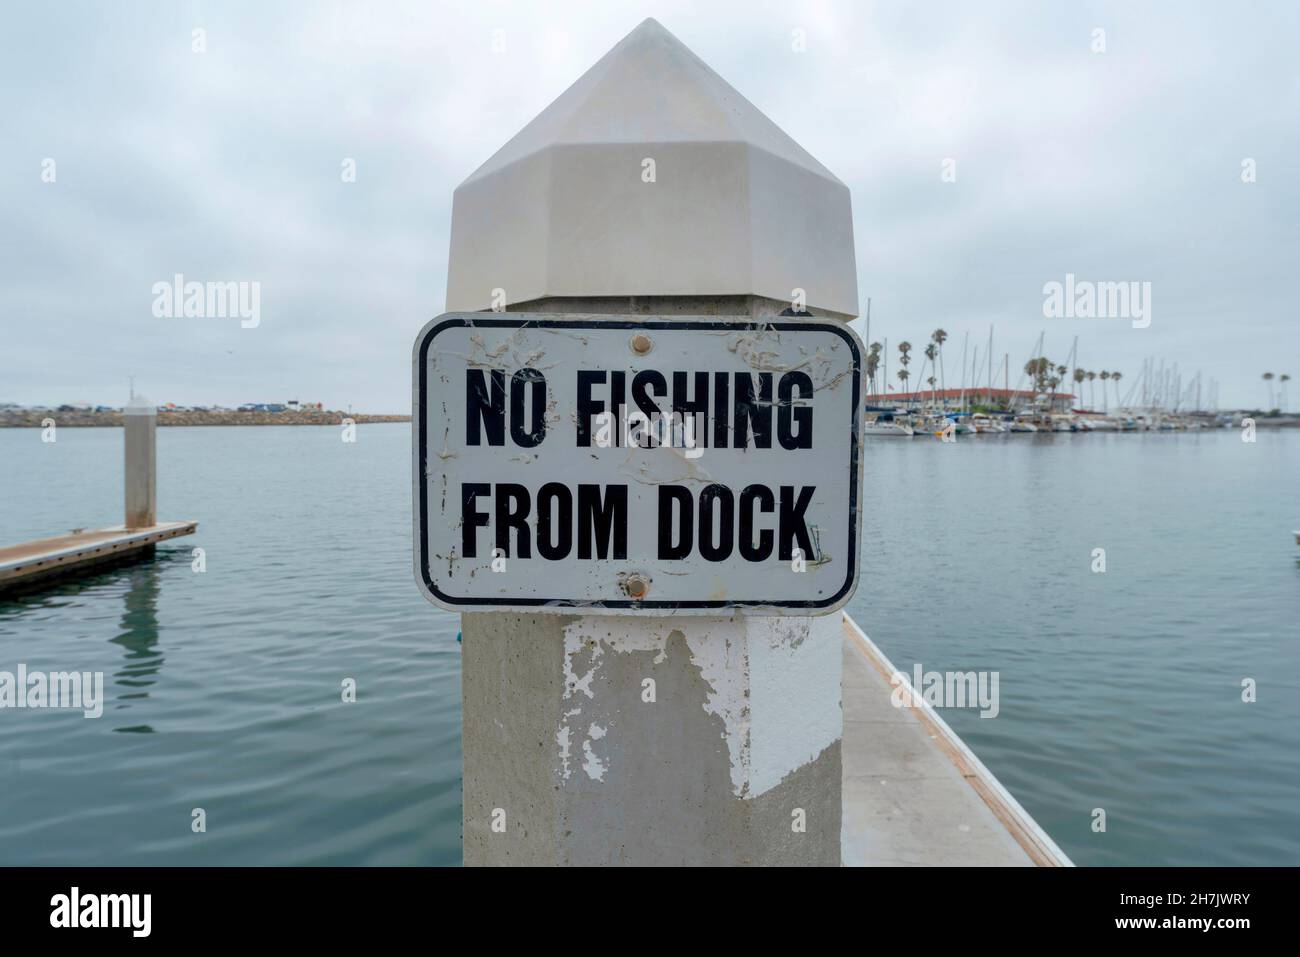 No fishing from dock old signage at Oceanside, California. Close